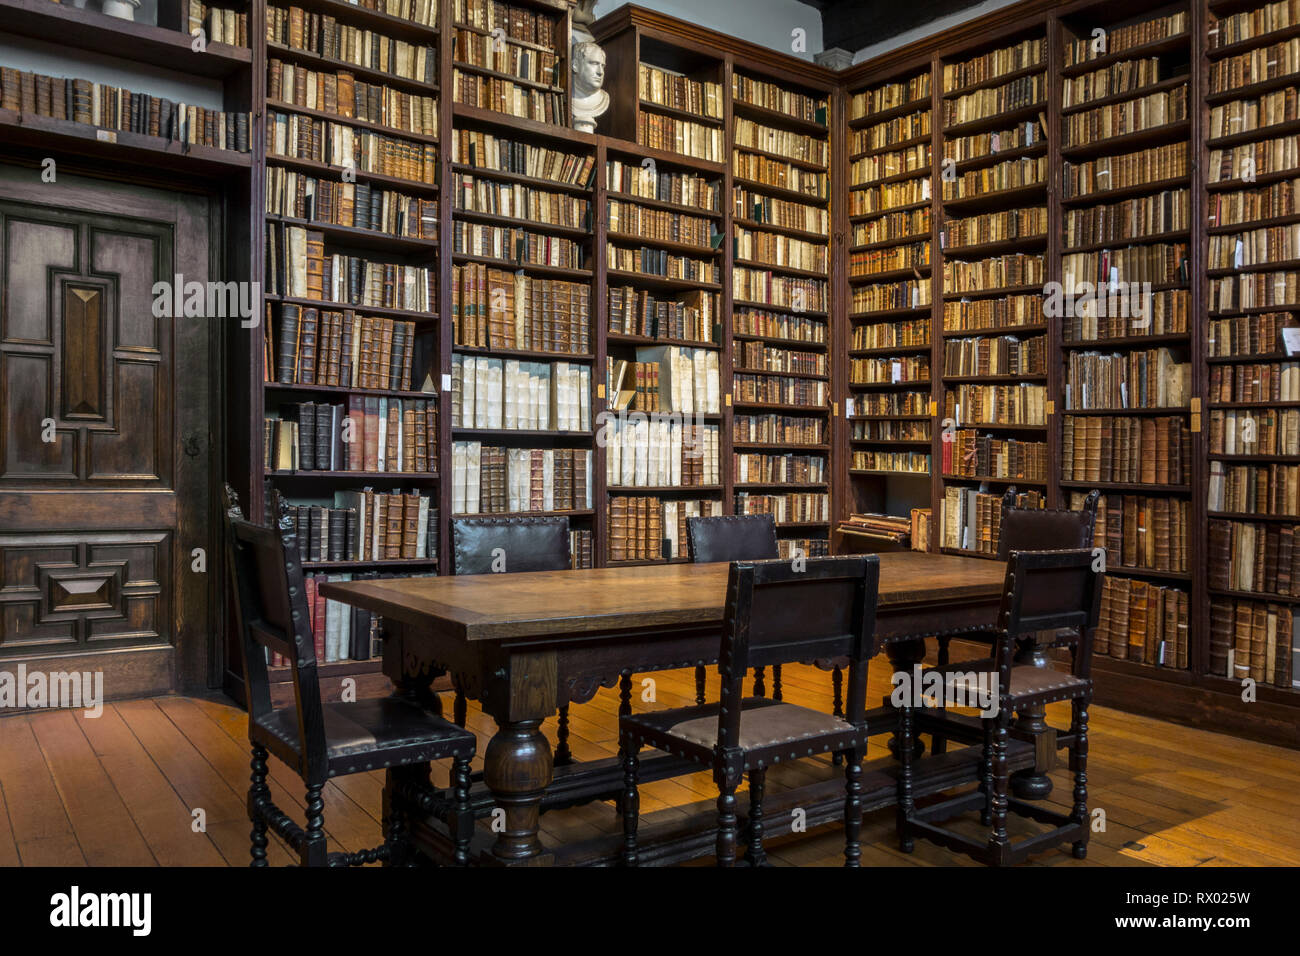 Bookshelves with old books in the Small Library at the Plantin-Moretus Museum / Plantin-Moretusmuseum about 16th century printers, Antwerp, Belgium Stock Photo